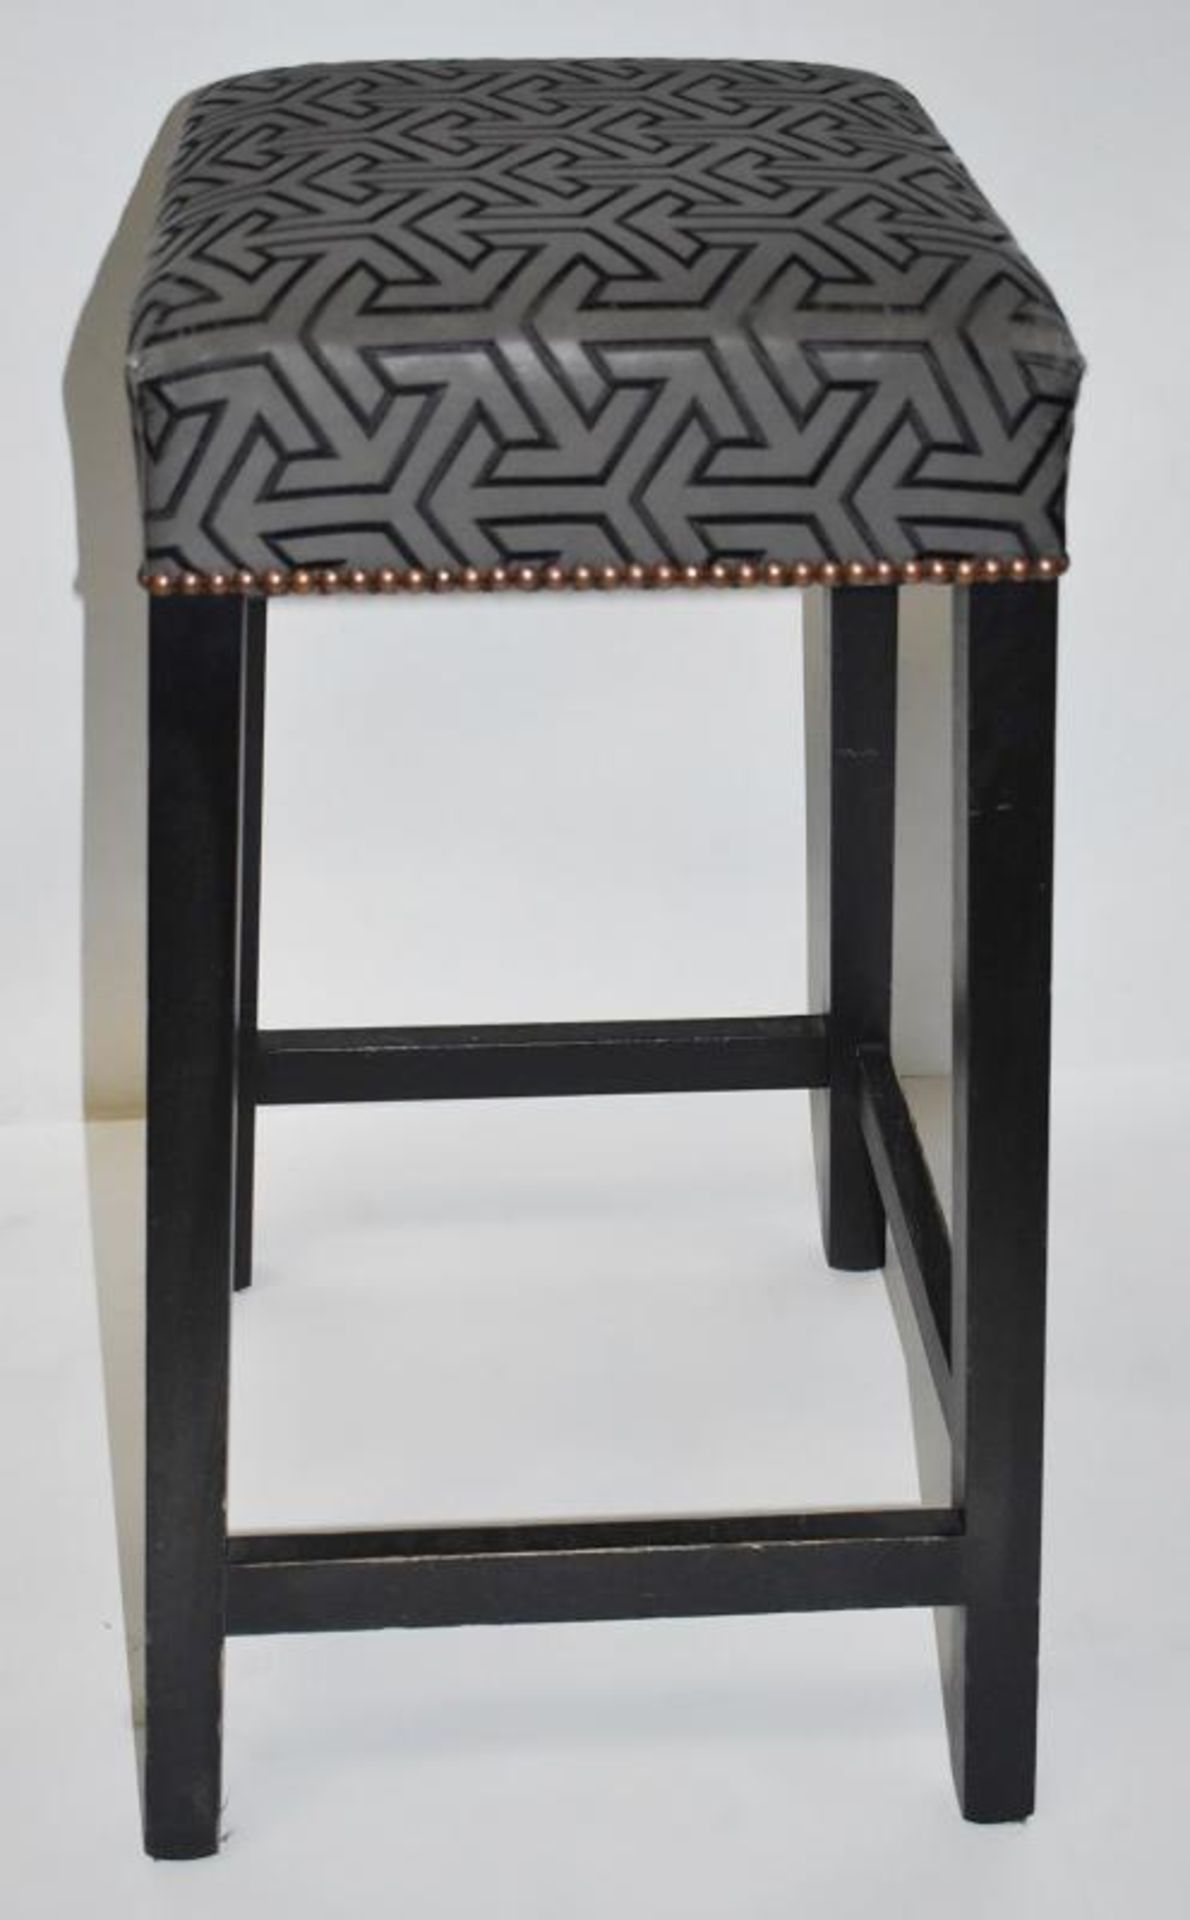 1 x Contemporary Bar Stool Upholstered In A Chic Designer Fabric - Recently Removed From A Famous De - Image 3 of 6